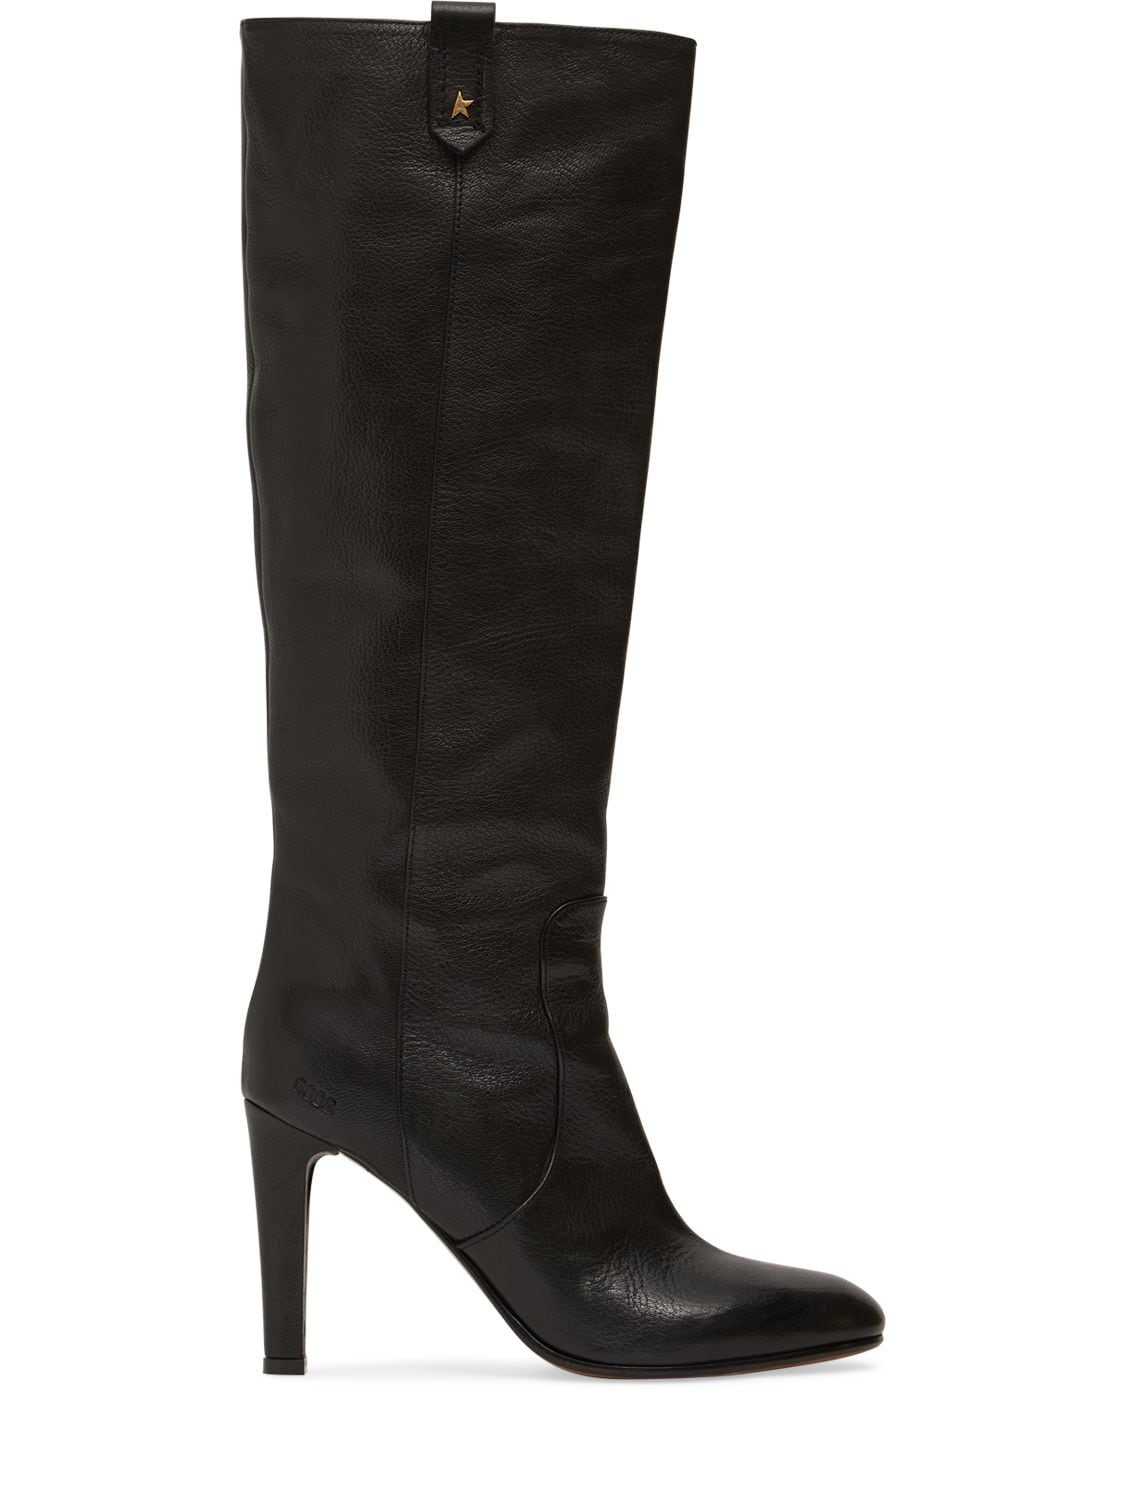 Golden Goose 100mm Helen Leather Tall Boots In Black